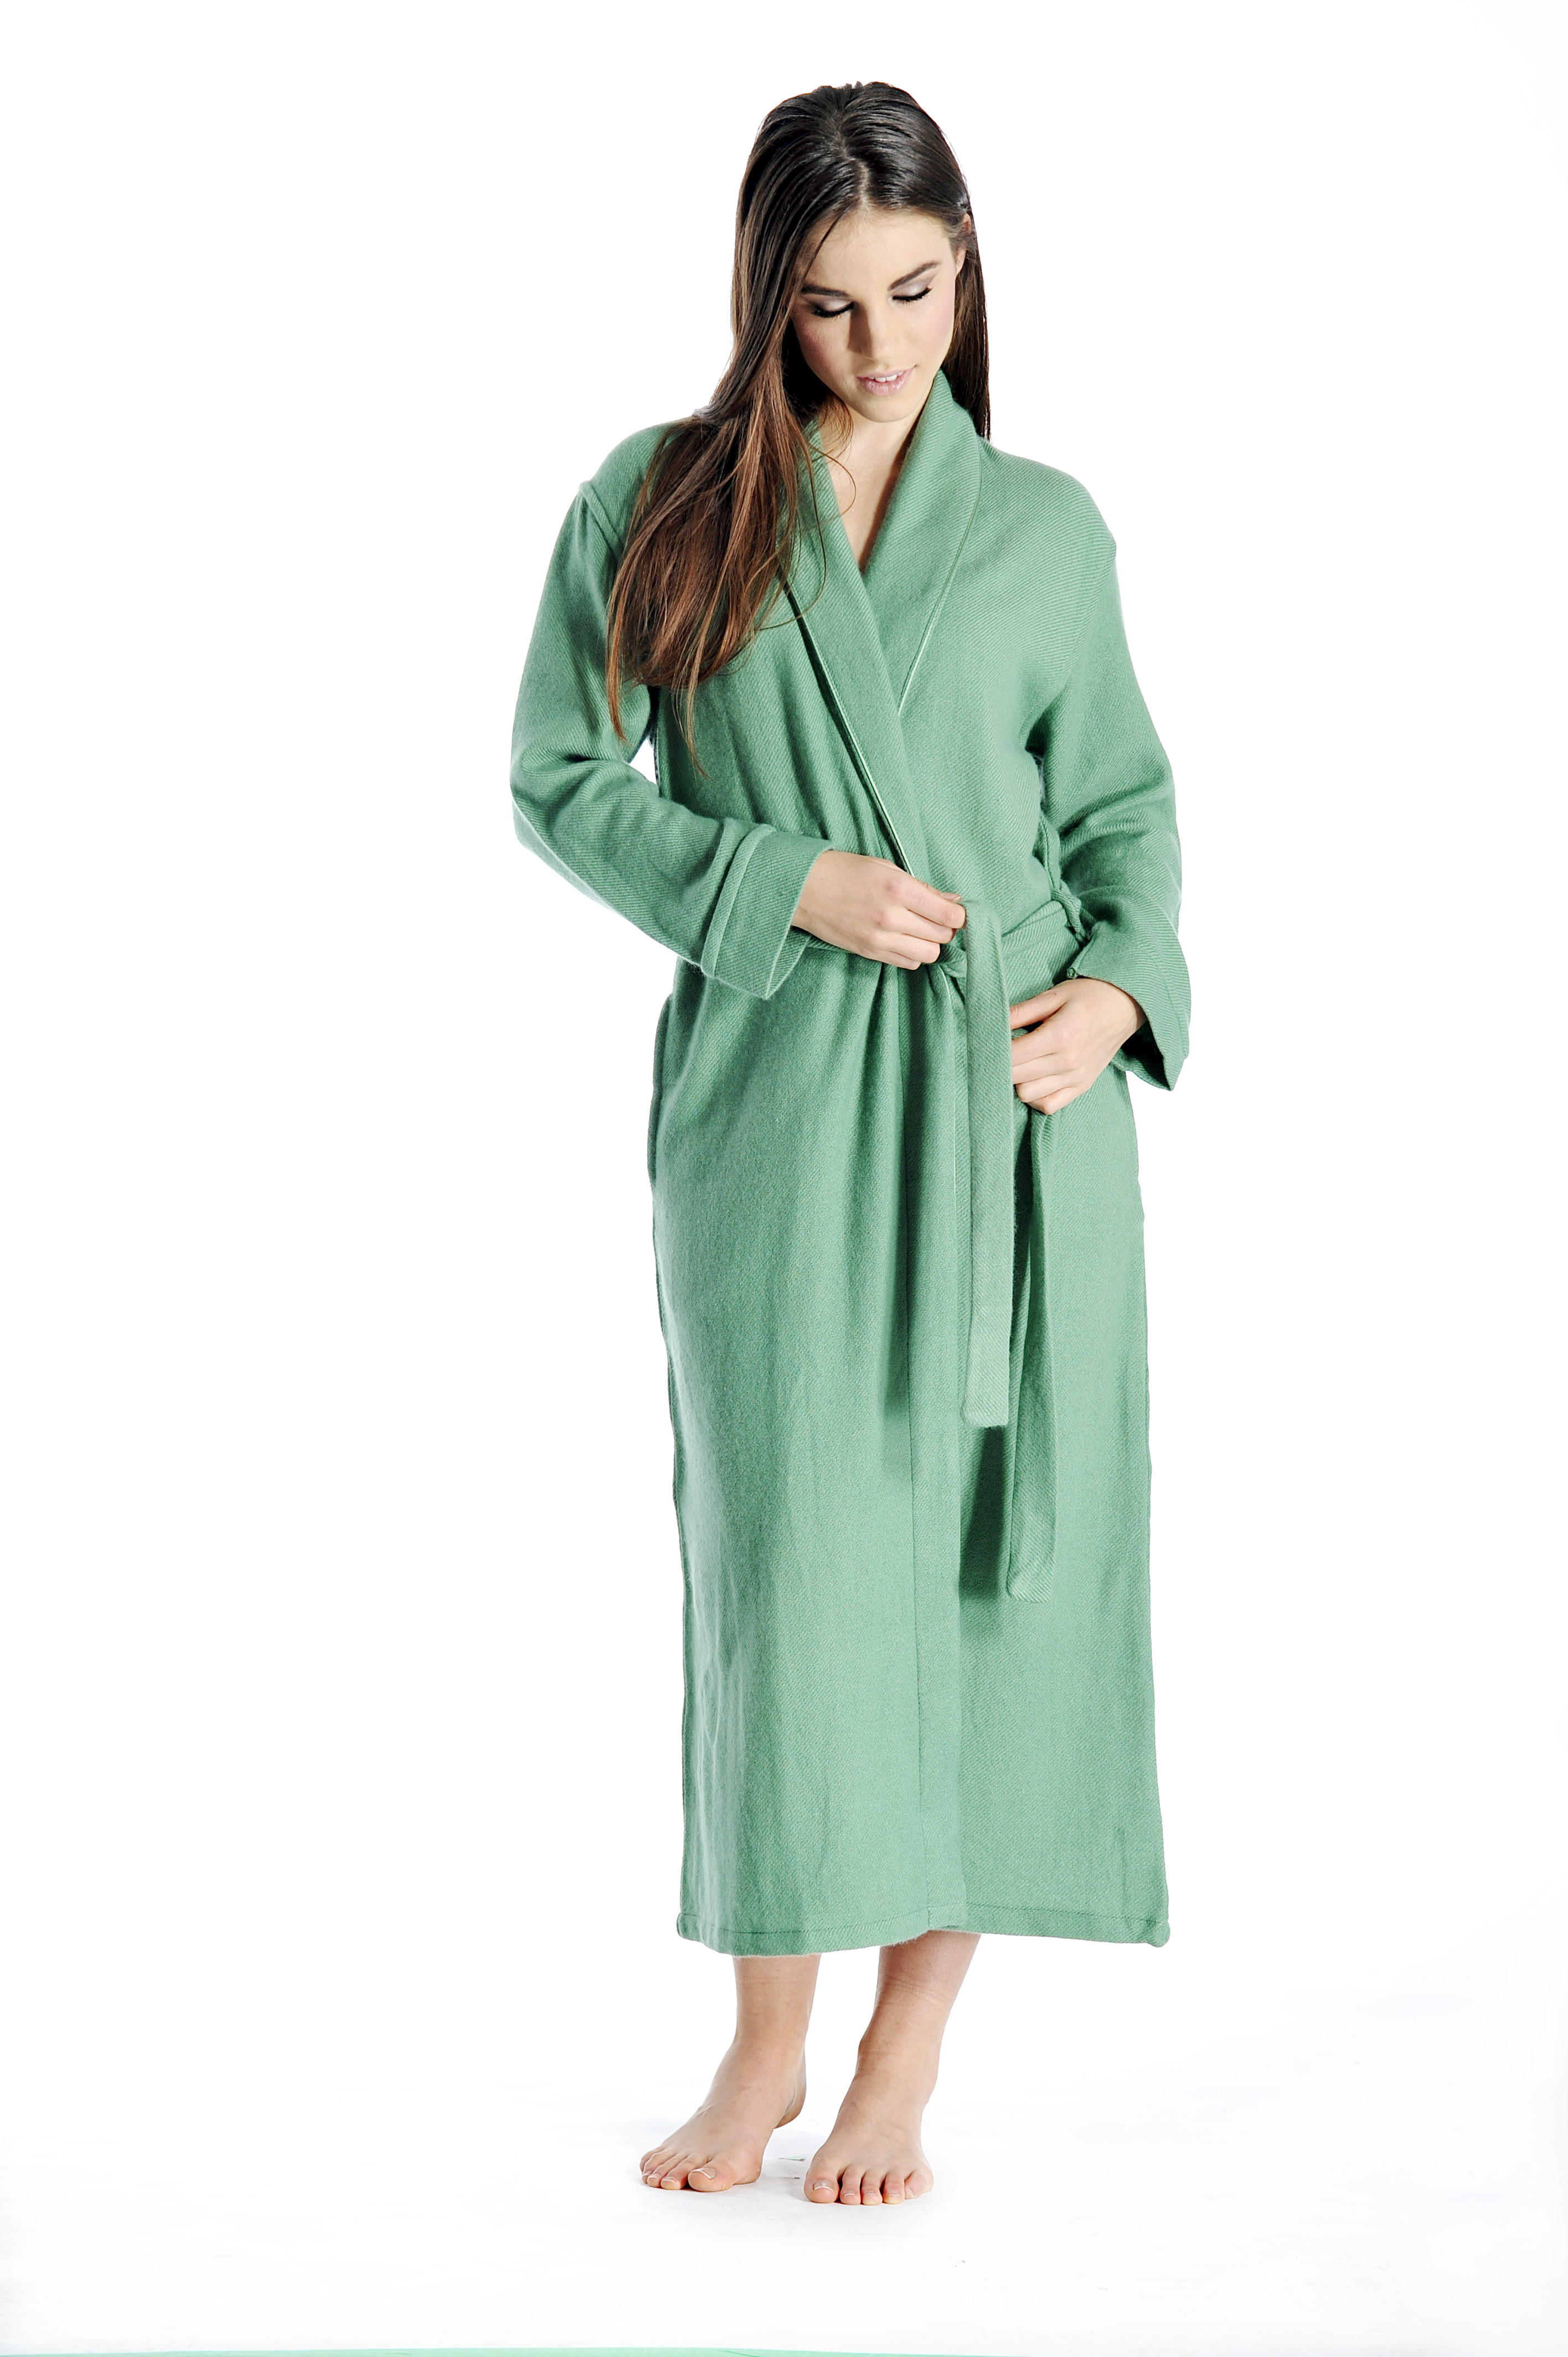 Pure Cashmere Full Length Robe for Women (Raspberry Sorbet, Large/Extra Large)